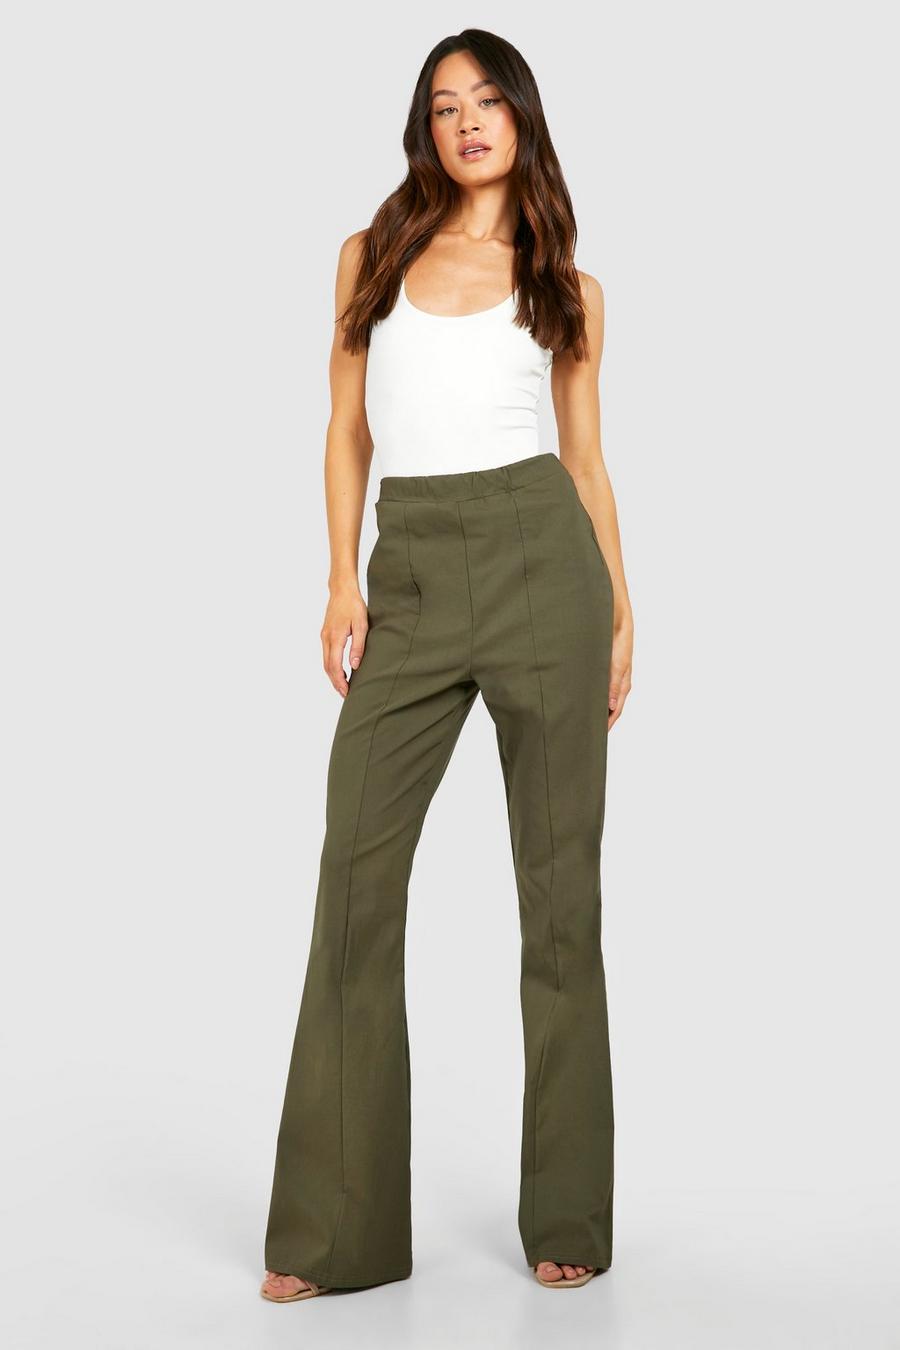 Khaki Tall Bengaline Stretch Fit And Flare Pants